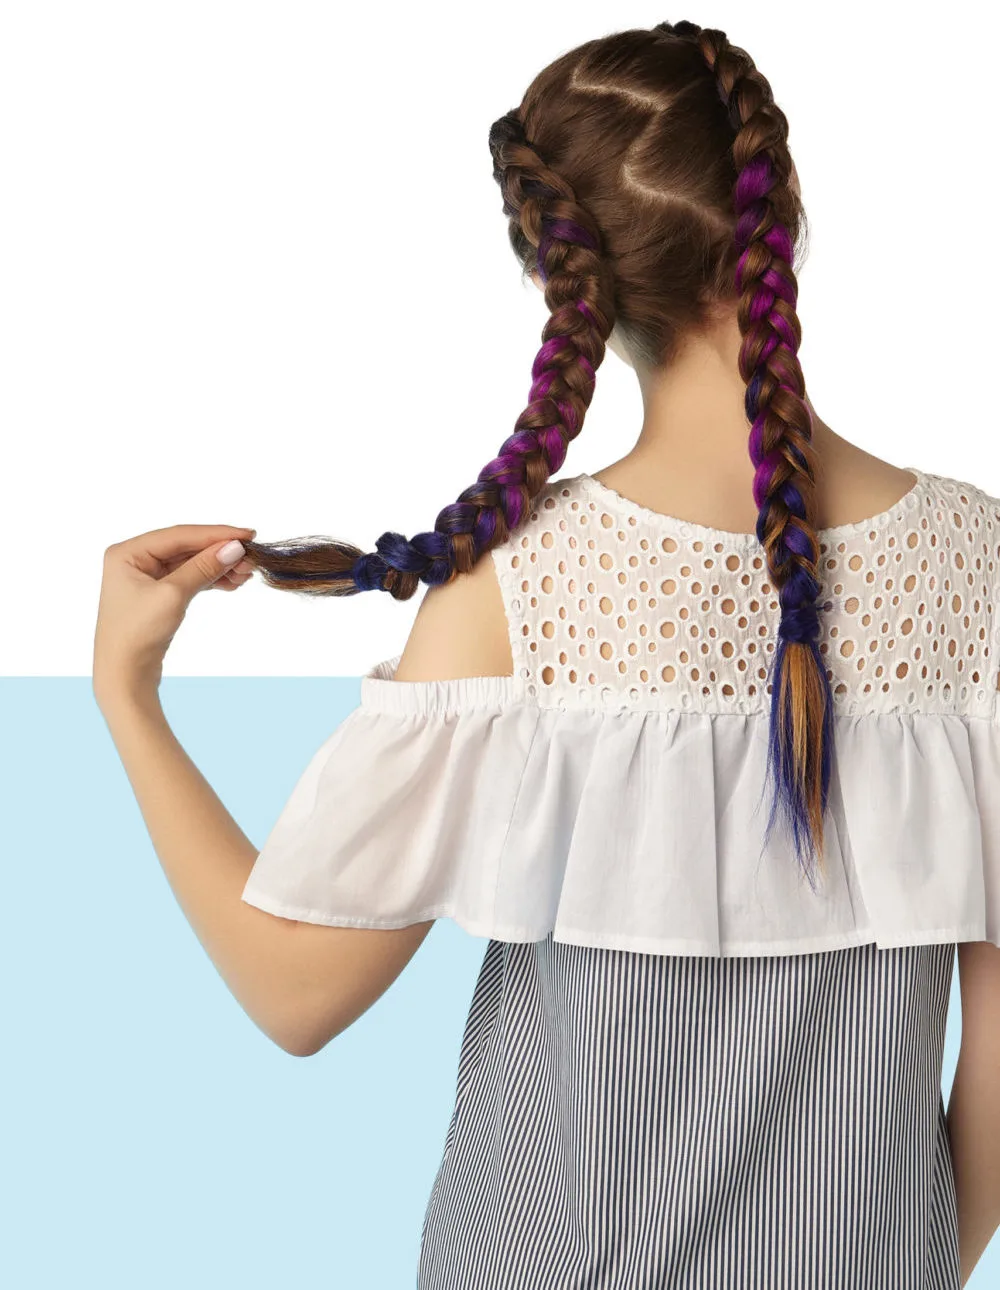 Zigzag Parts, one of the trending y2k hairstyles, on a woman in a blouse and striped skirt